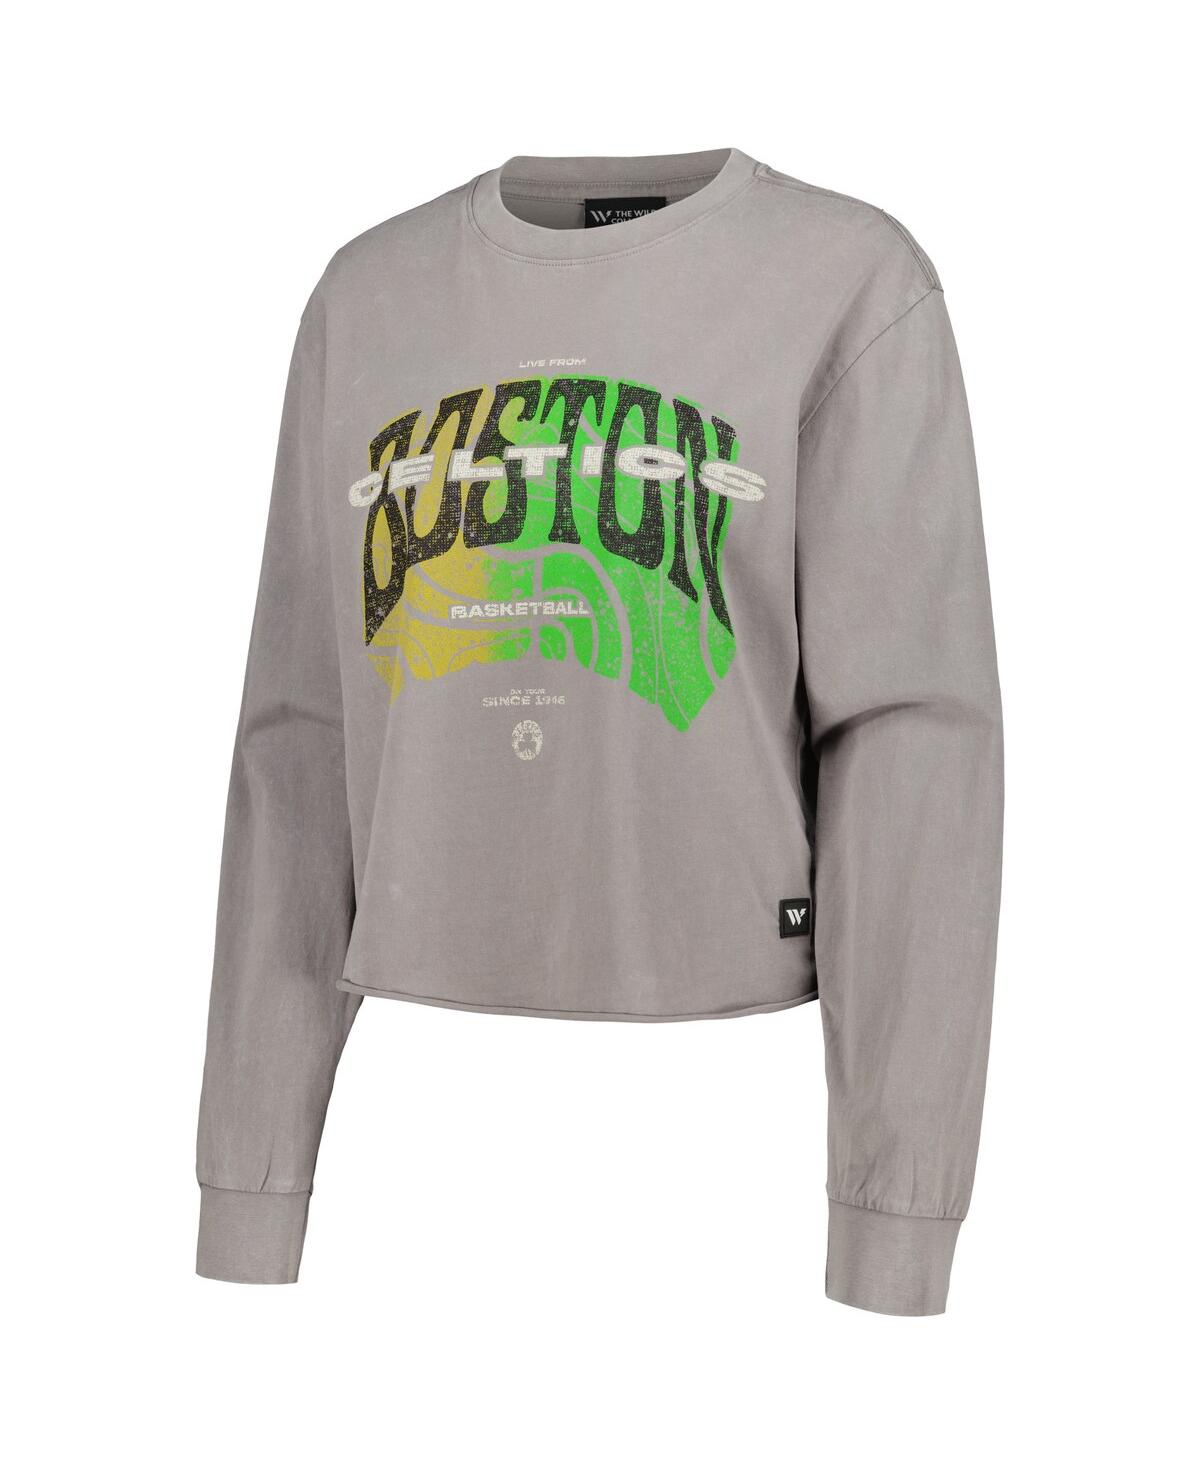 Shop The Wild Collective Women's  Gray Distressed Boston Celtics Band Cropped Long Sleeve T-shirt